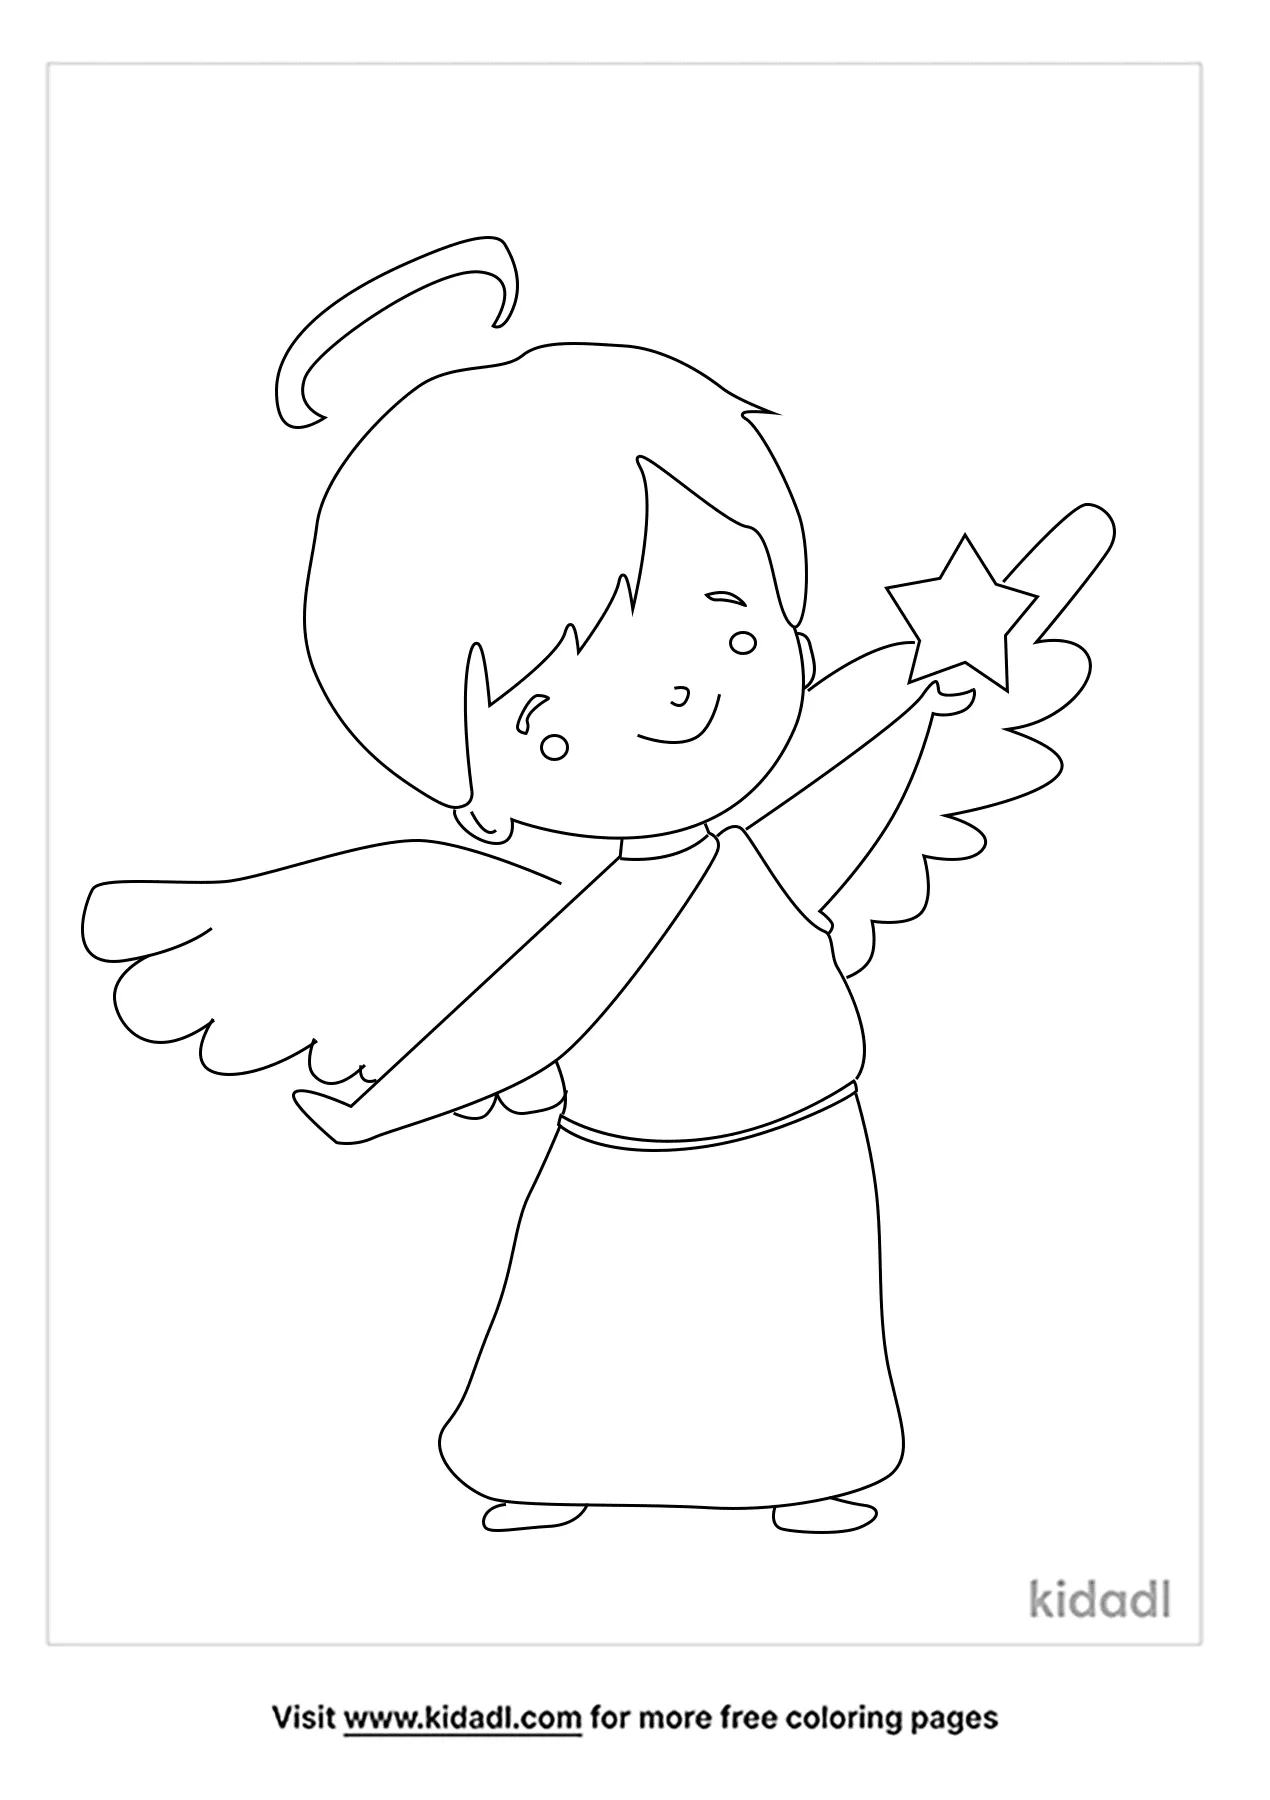 Boy Angel Coloring Page   Free Bible Coloring Page   Kidadl